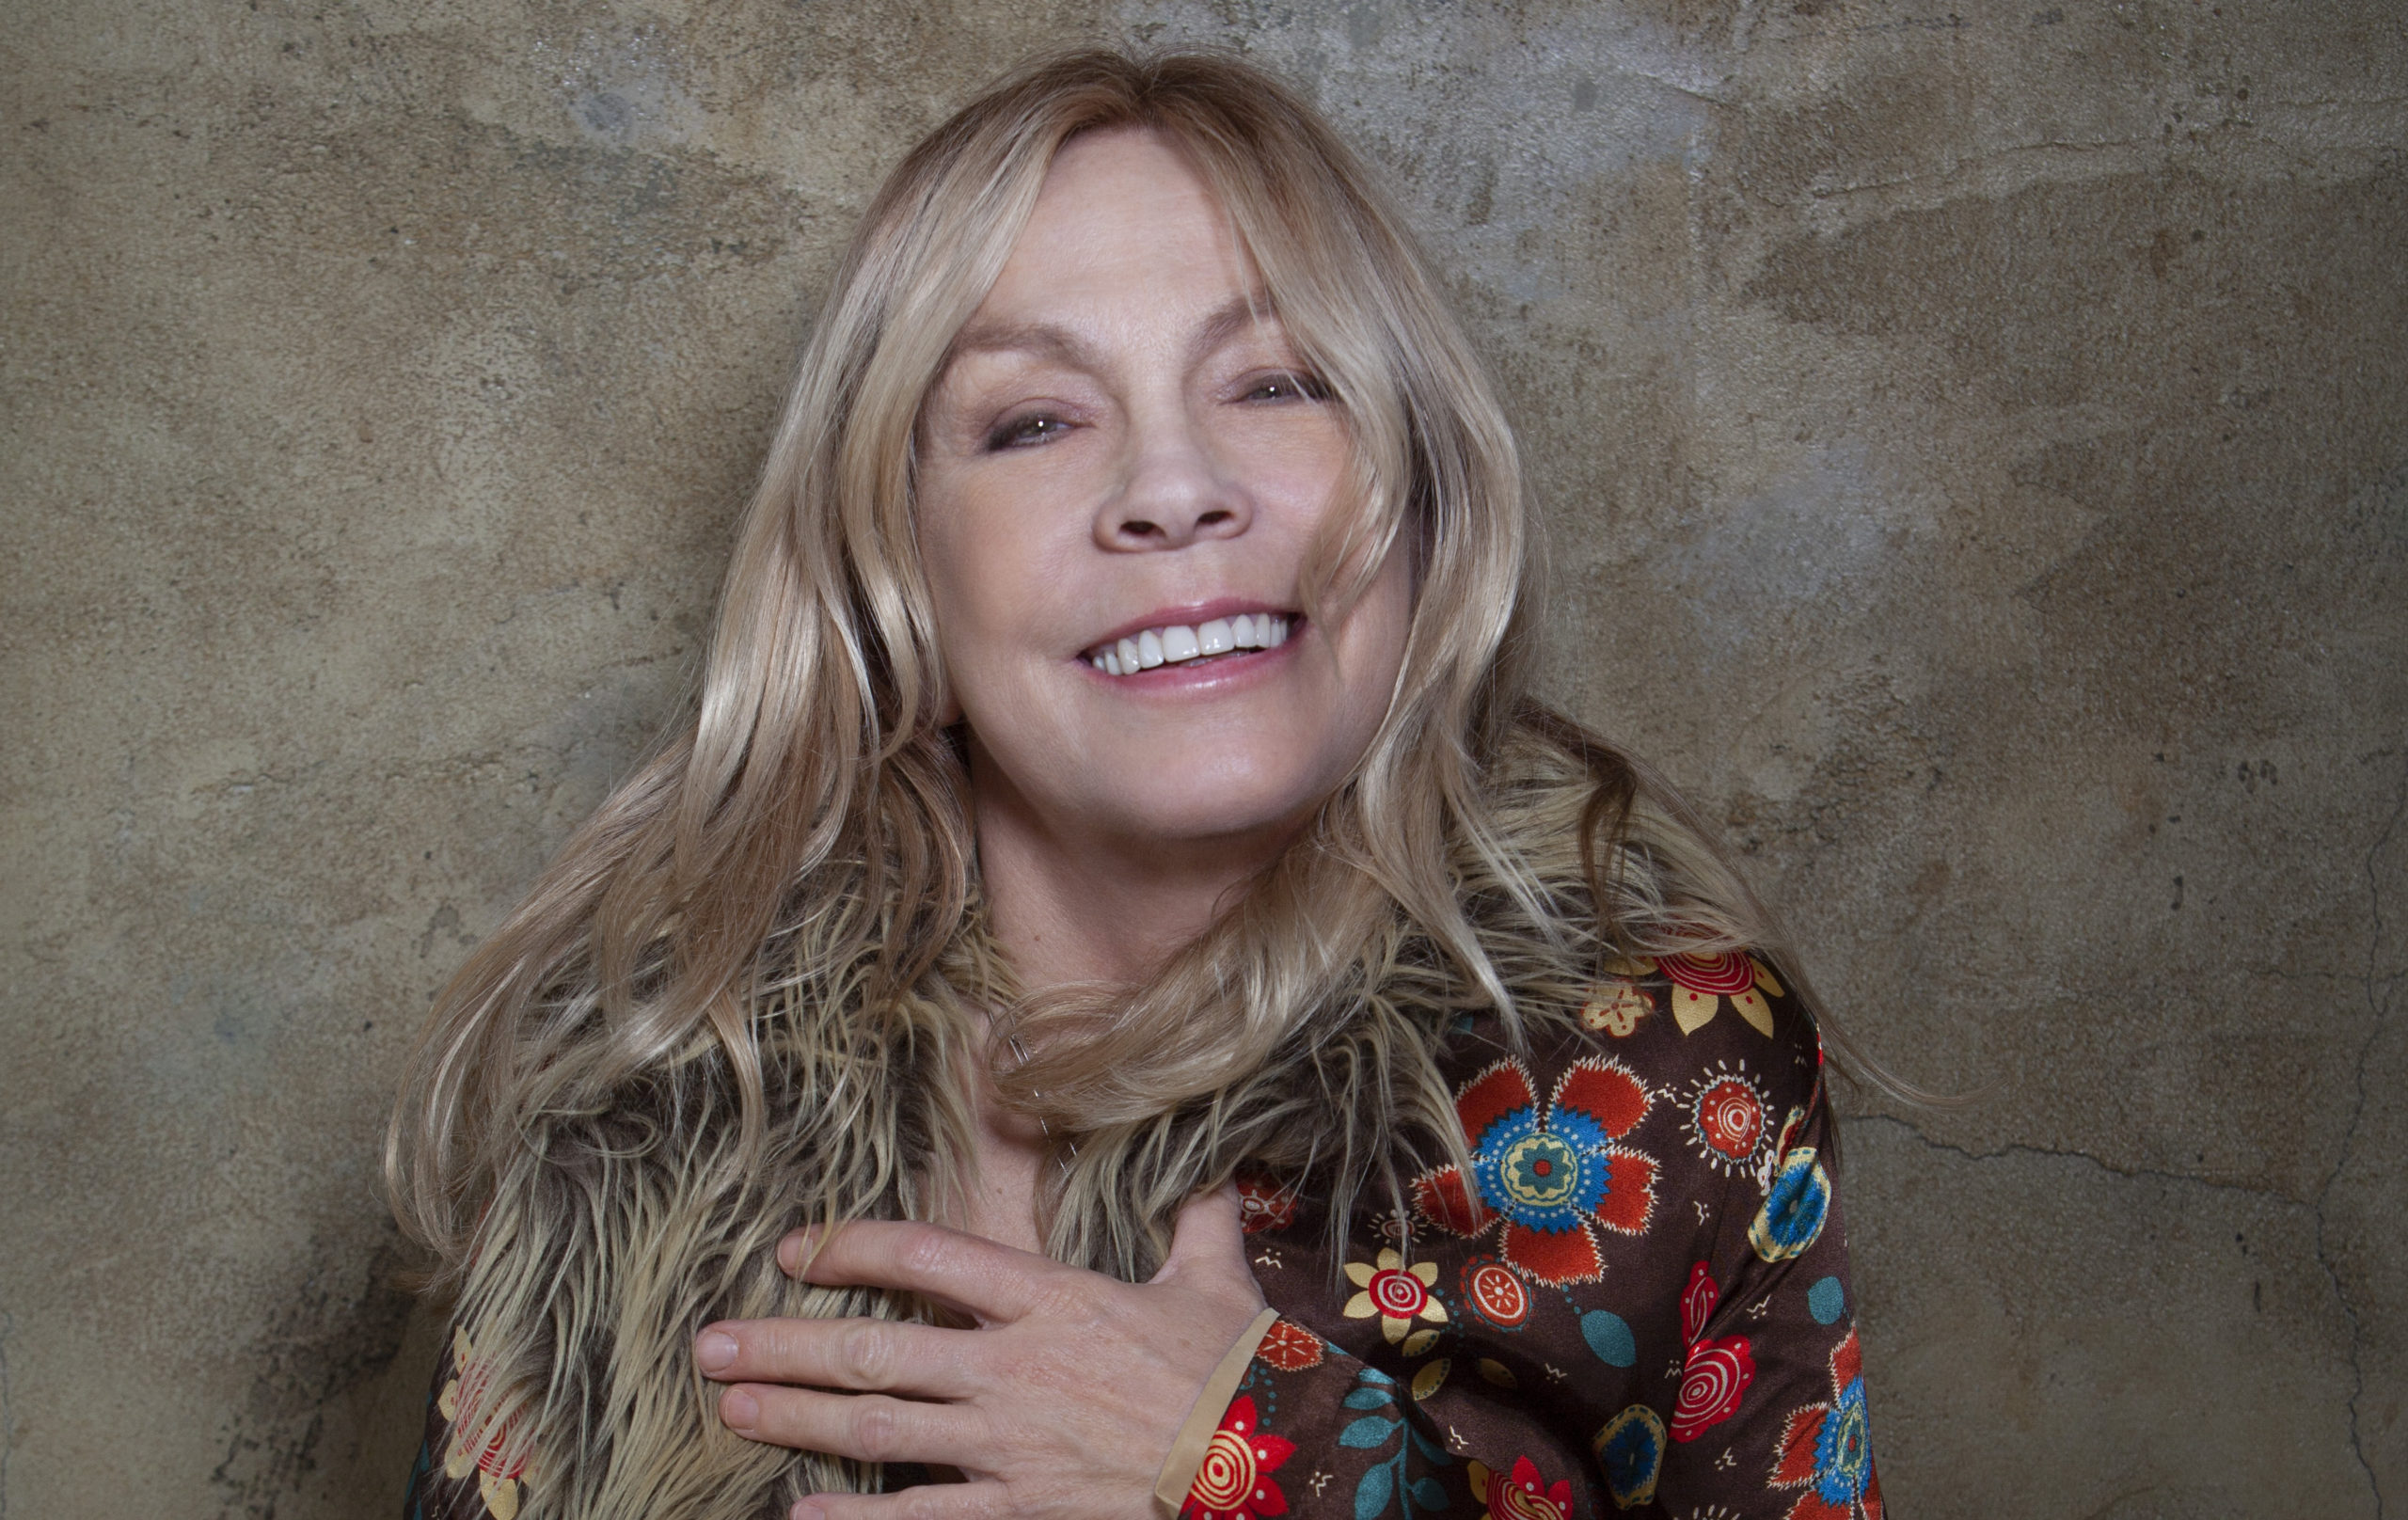 5 Albums I Can’t Live Without: Rickie Lee Jones